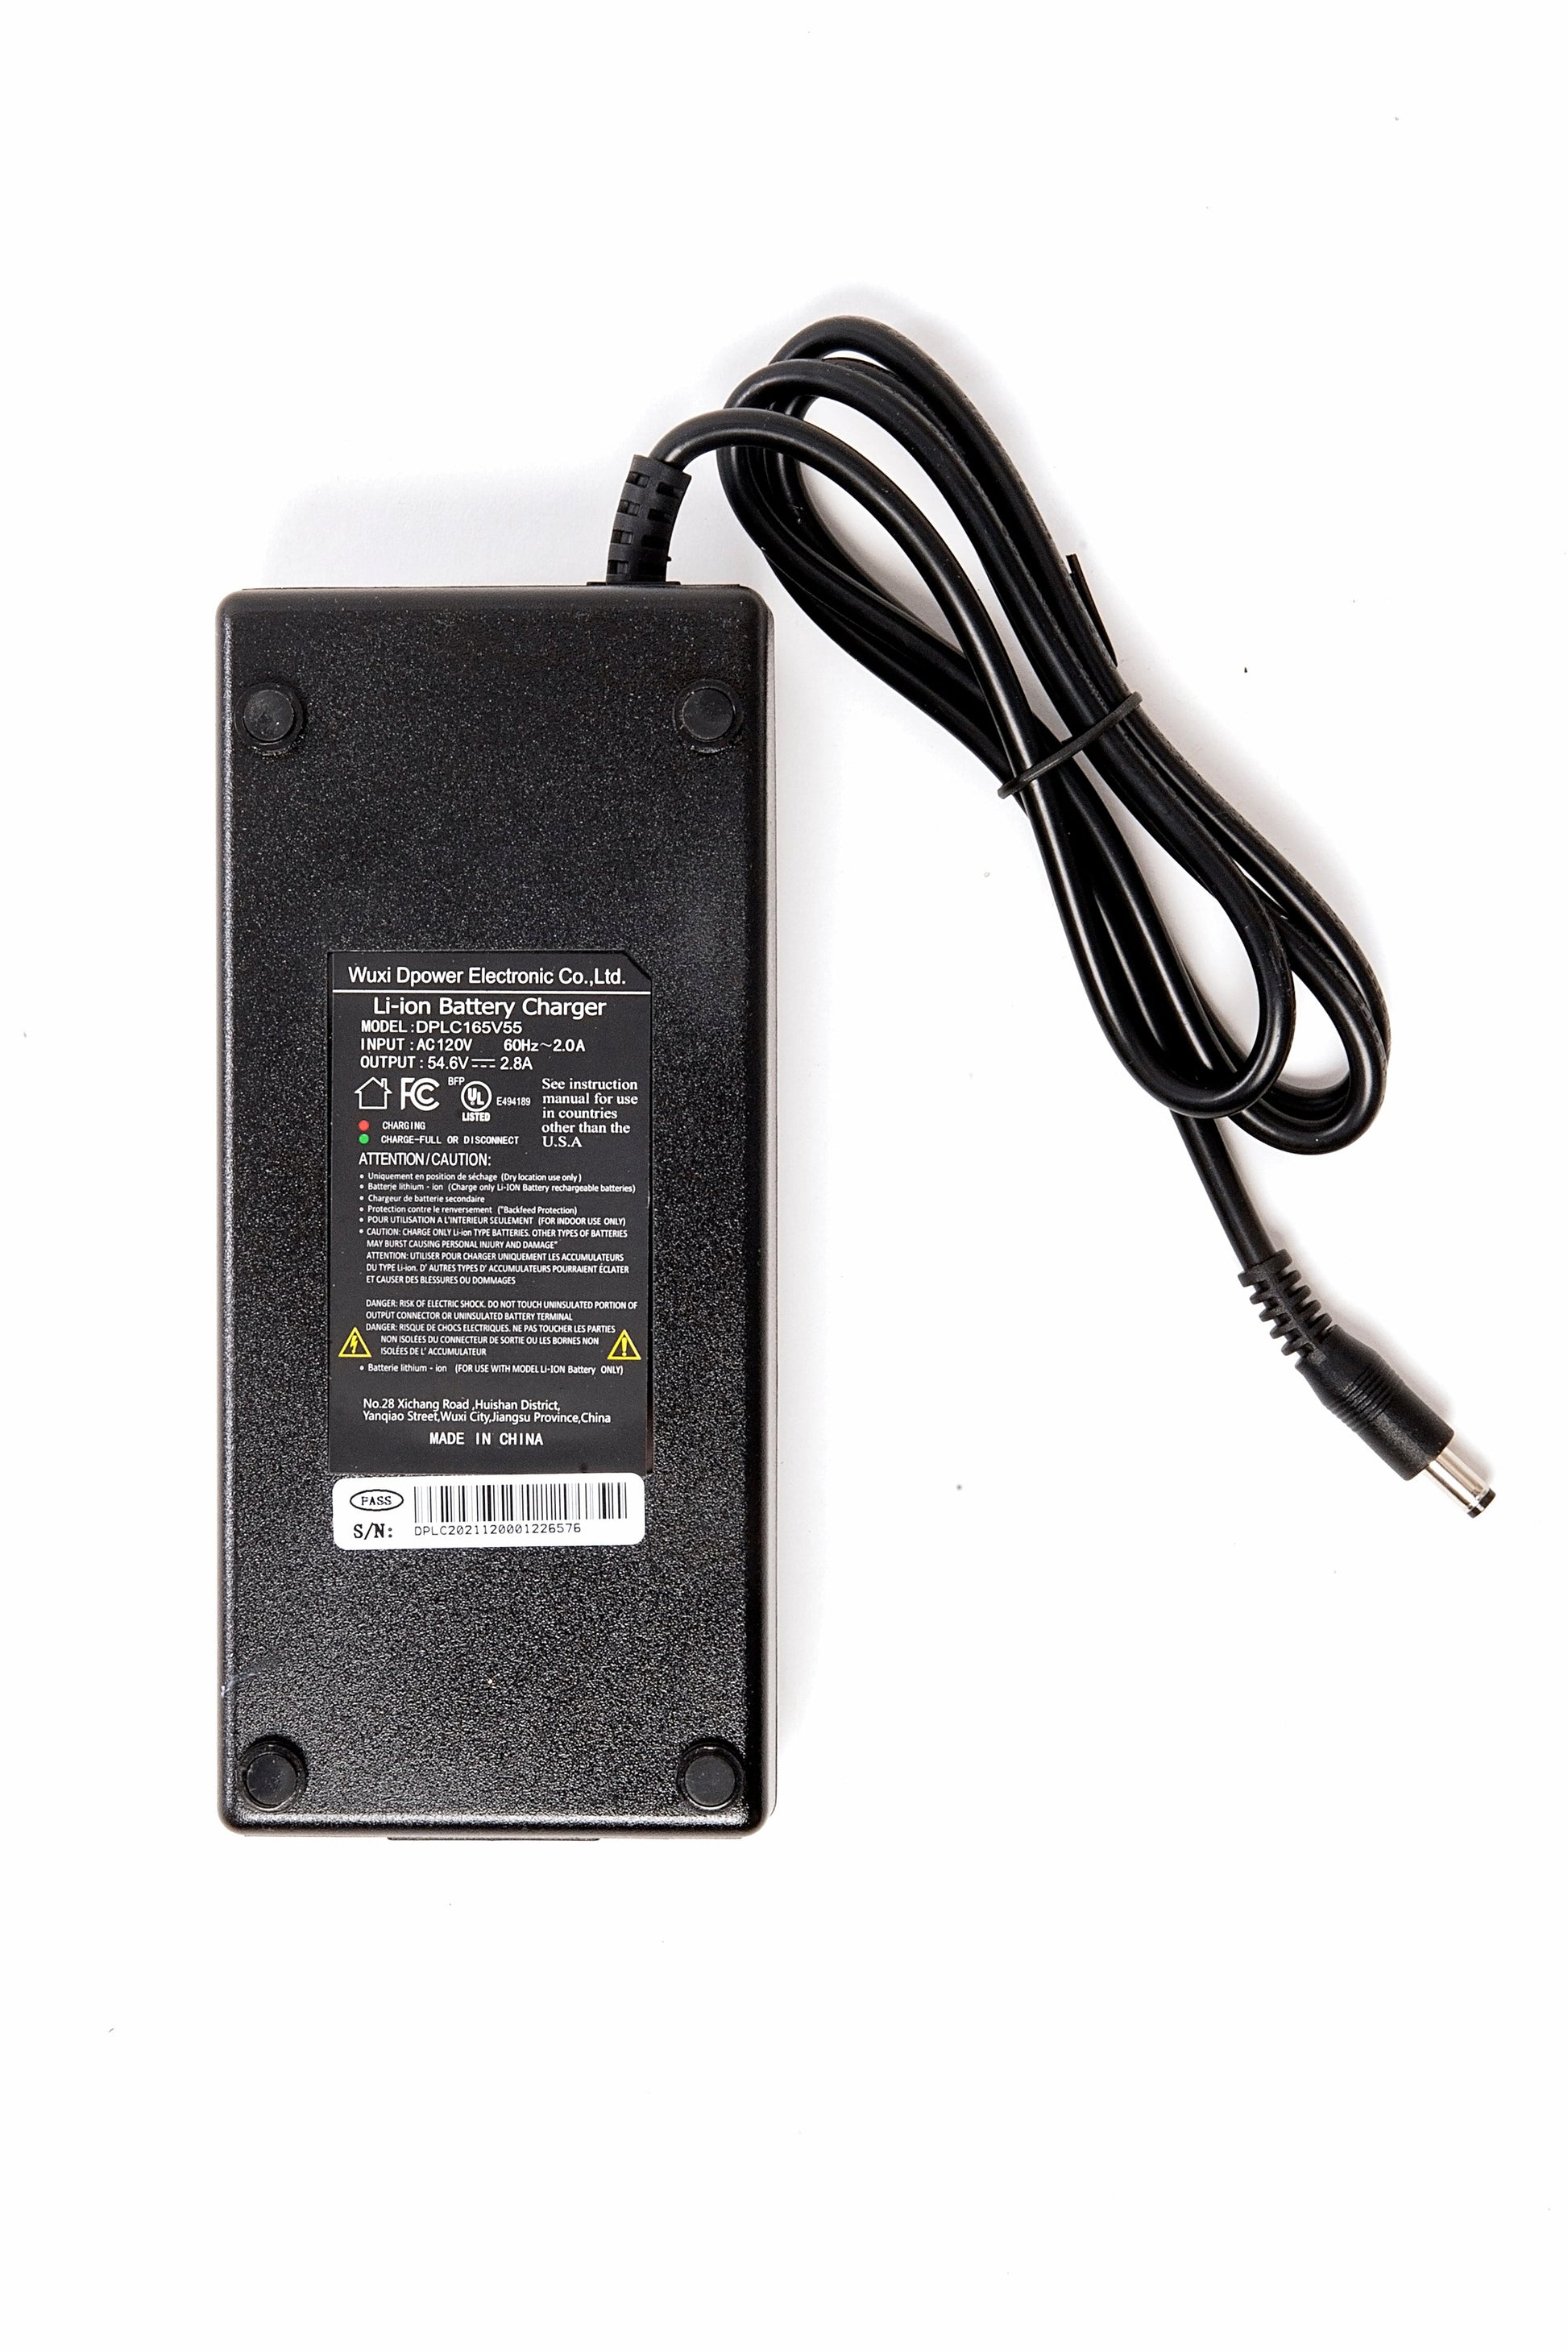 48v eBike battery charger with serial number and barcode laid out on white background